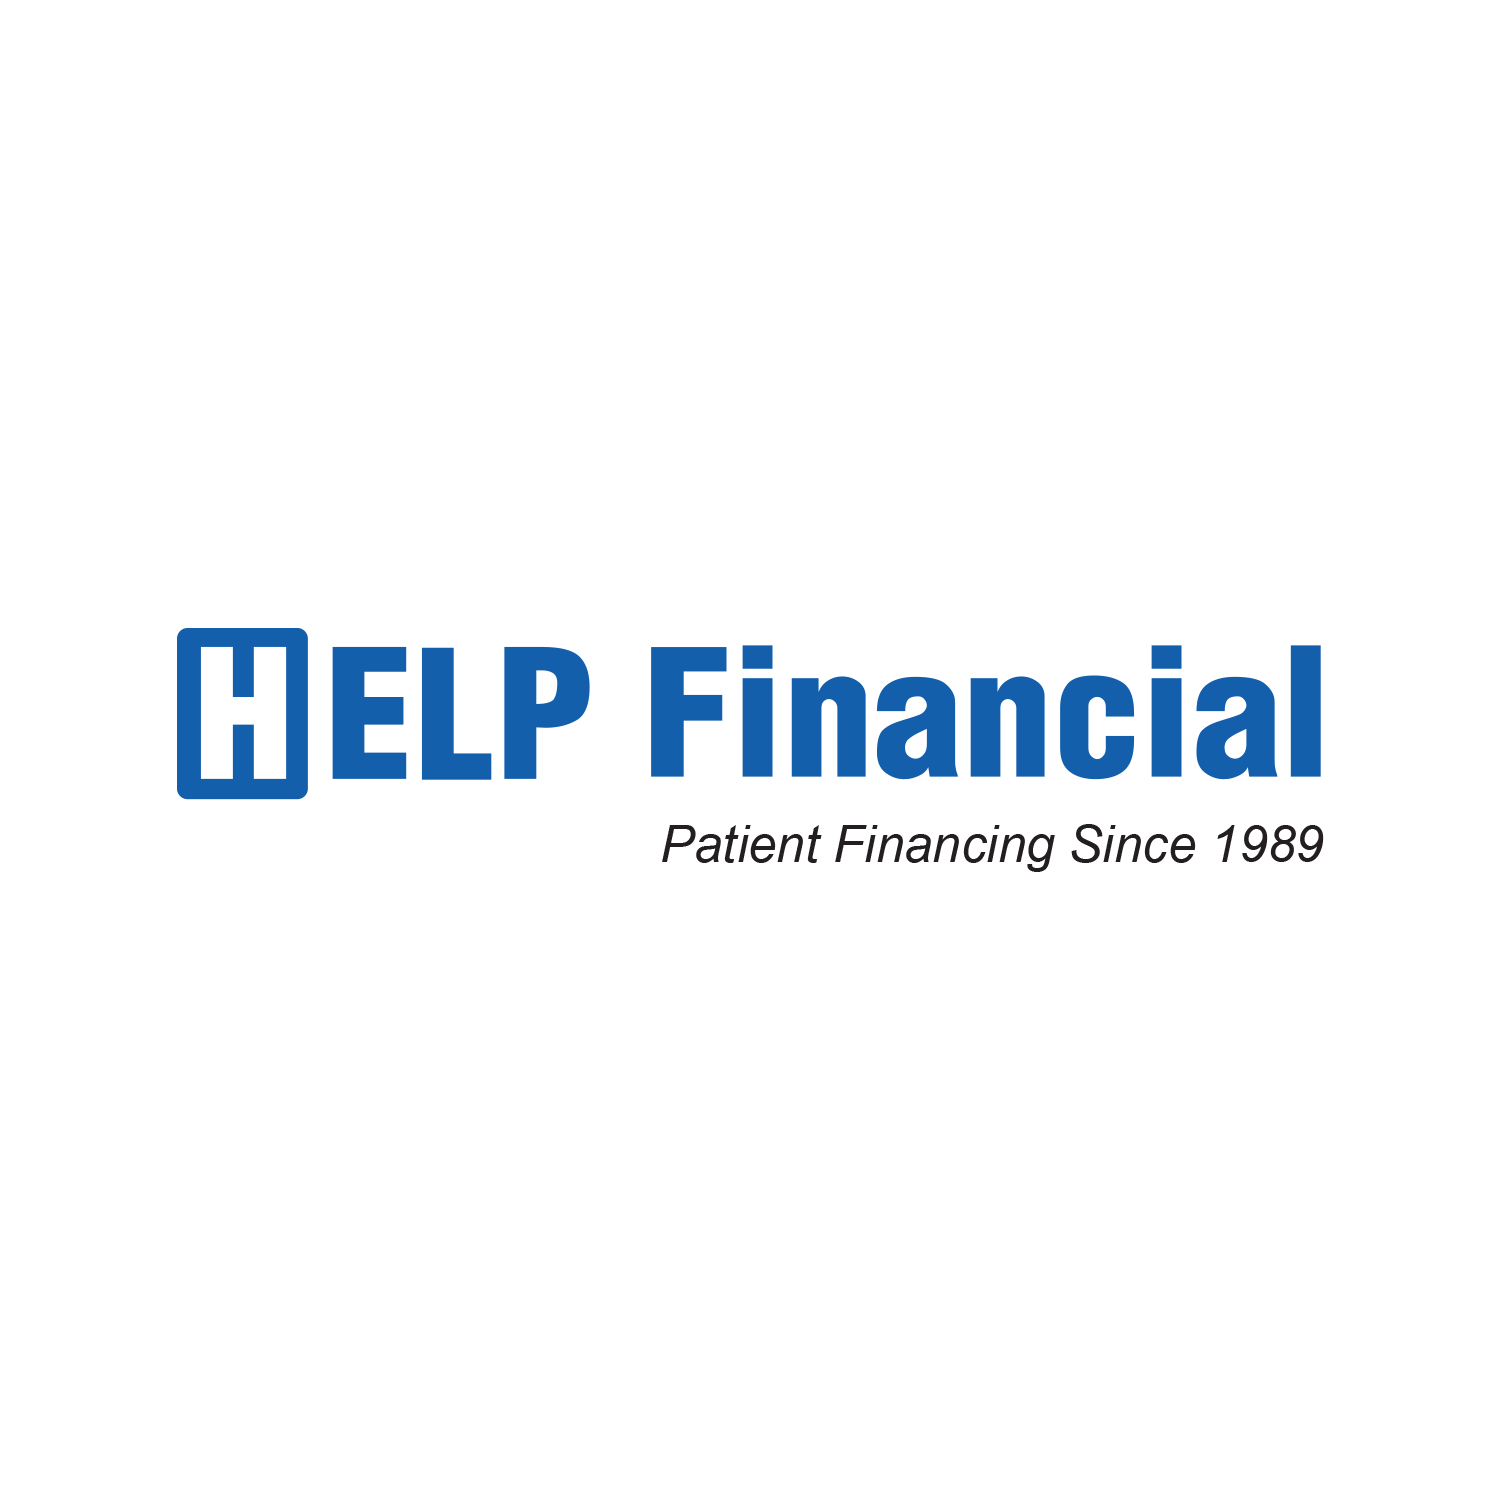 HELP Financial Patient Receives HFMA Peer Review Designation for Patient Financing Solutions